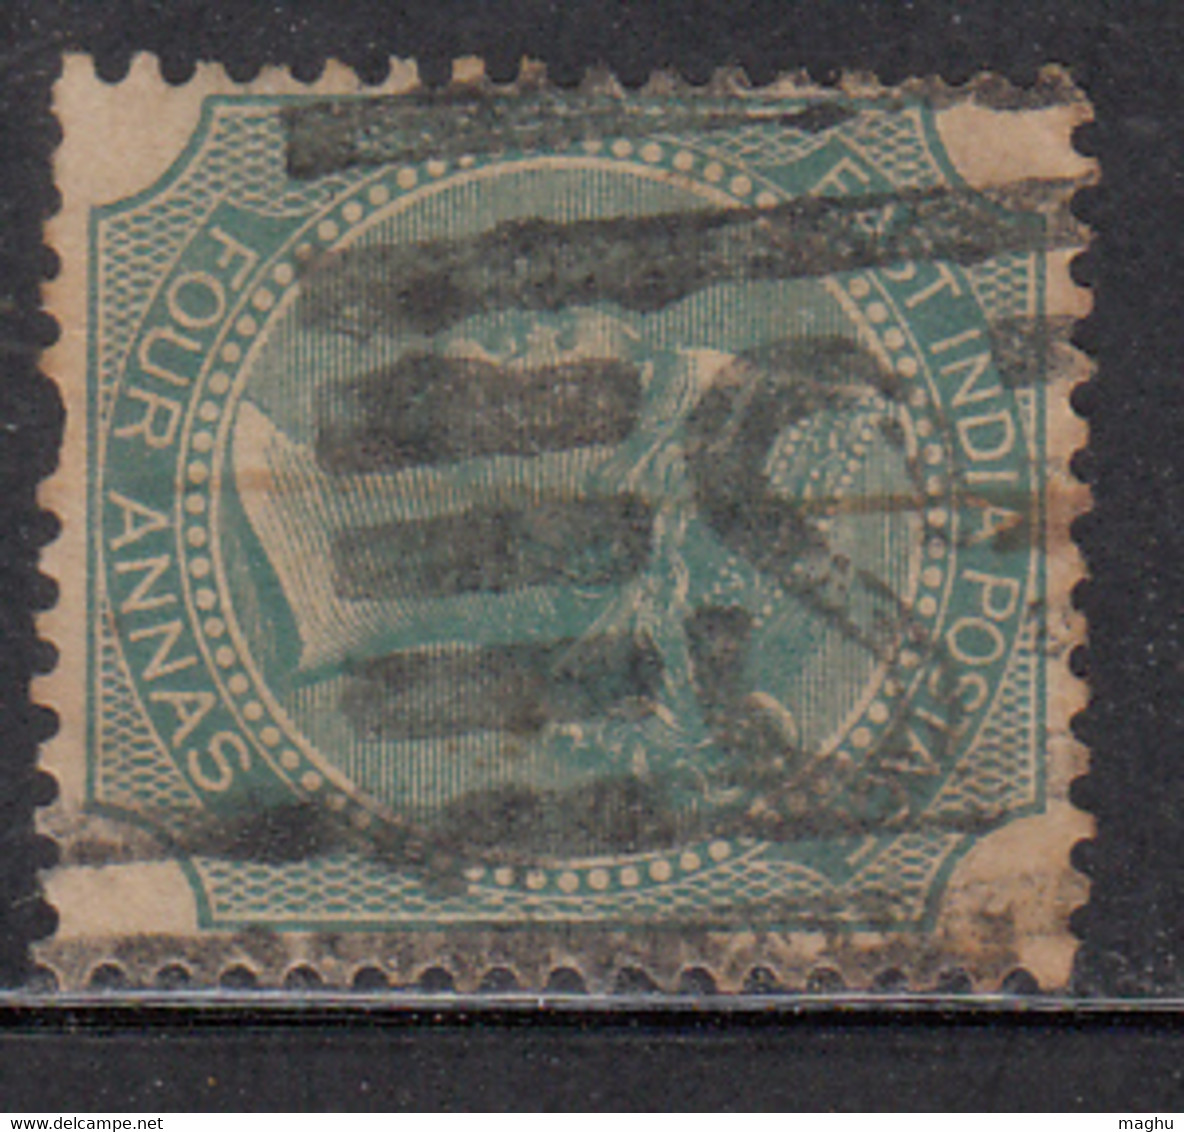 'B' Witin Rectangular Parallel Bars On Four Annas 1866, British India Used, JC Type 34 - 1854 East India Company Administration